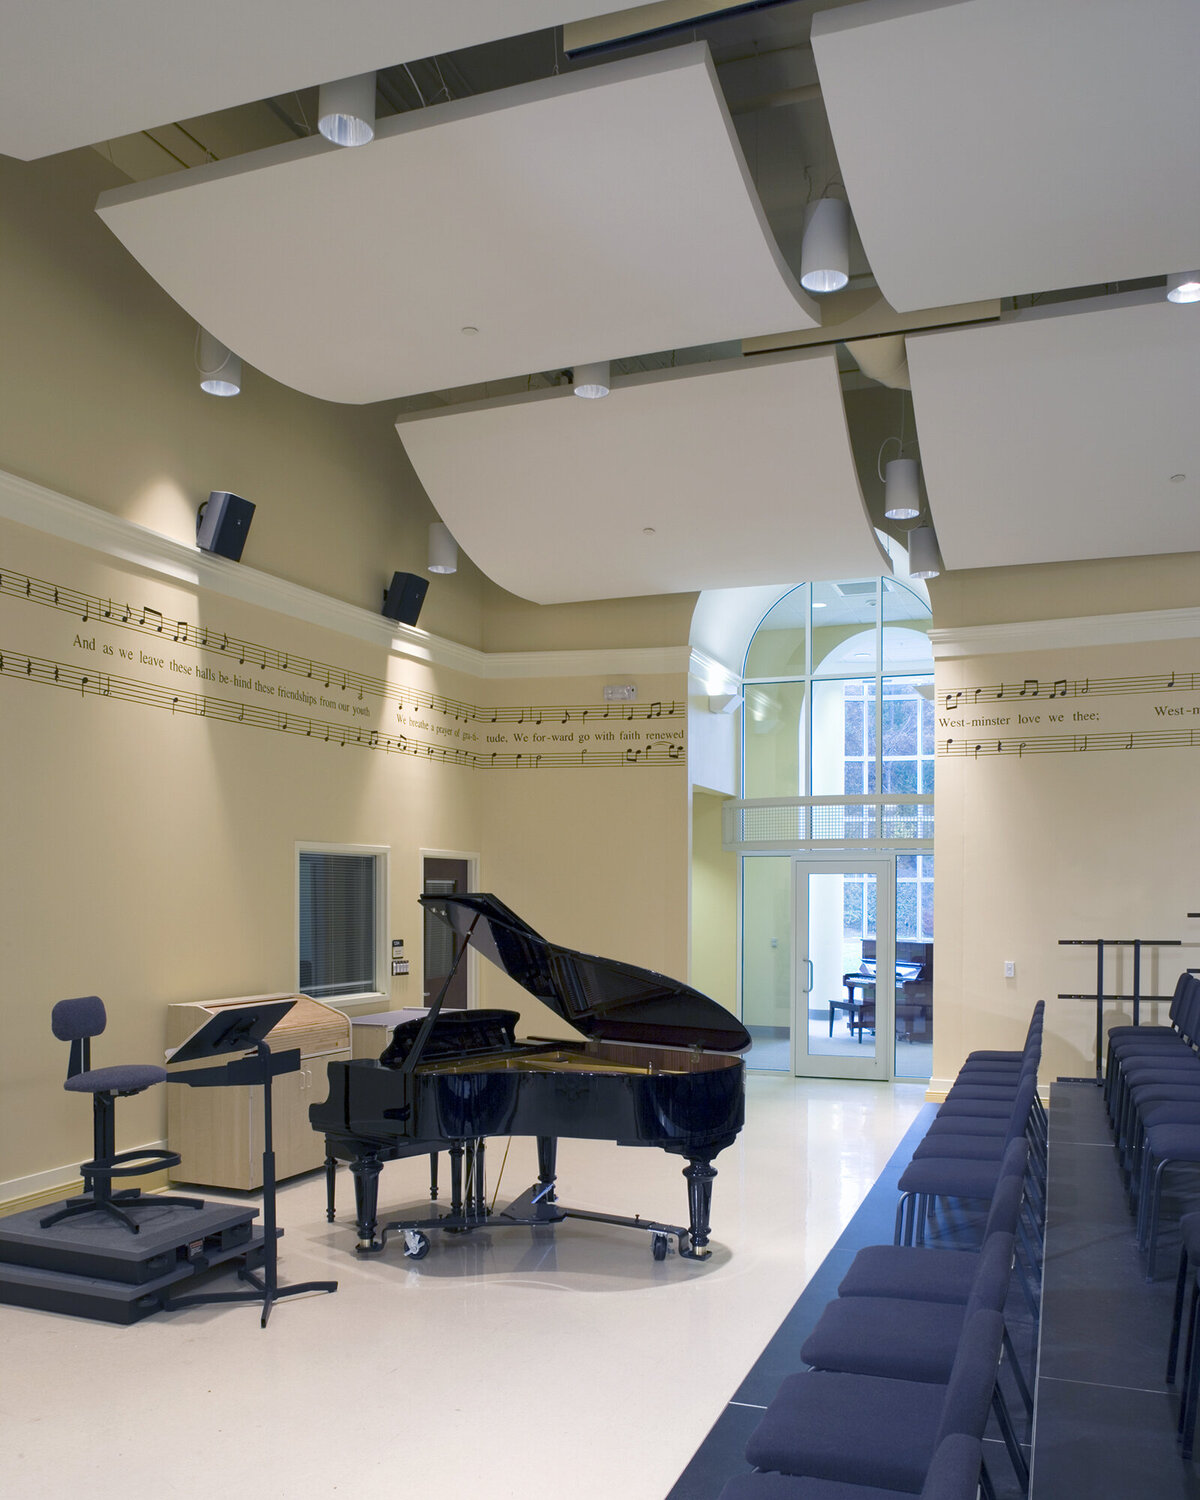 inside the choral music room at Westminster School